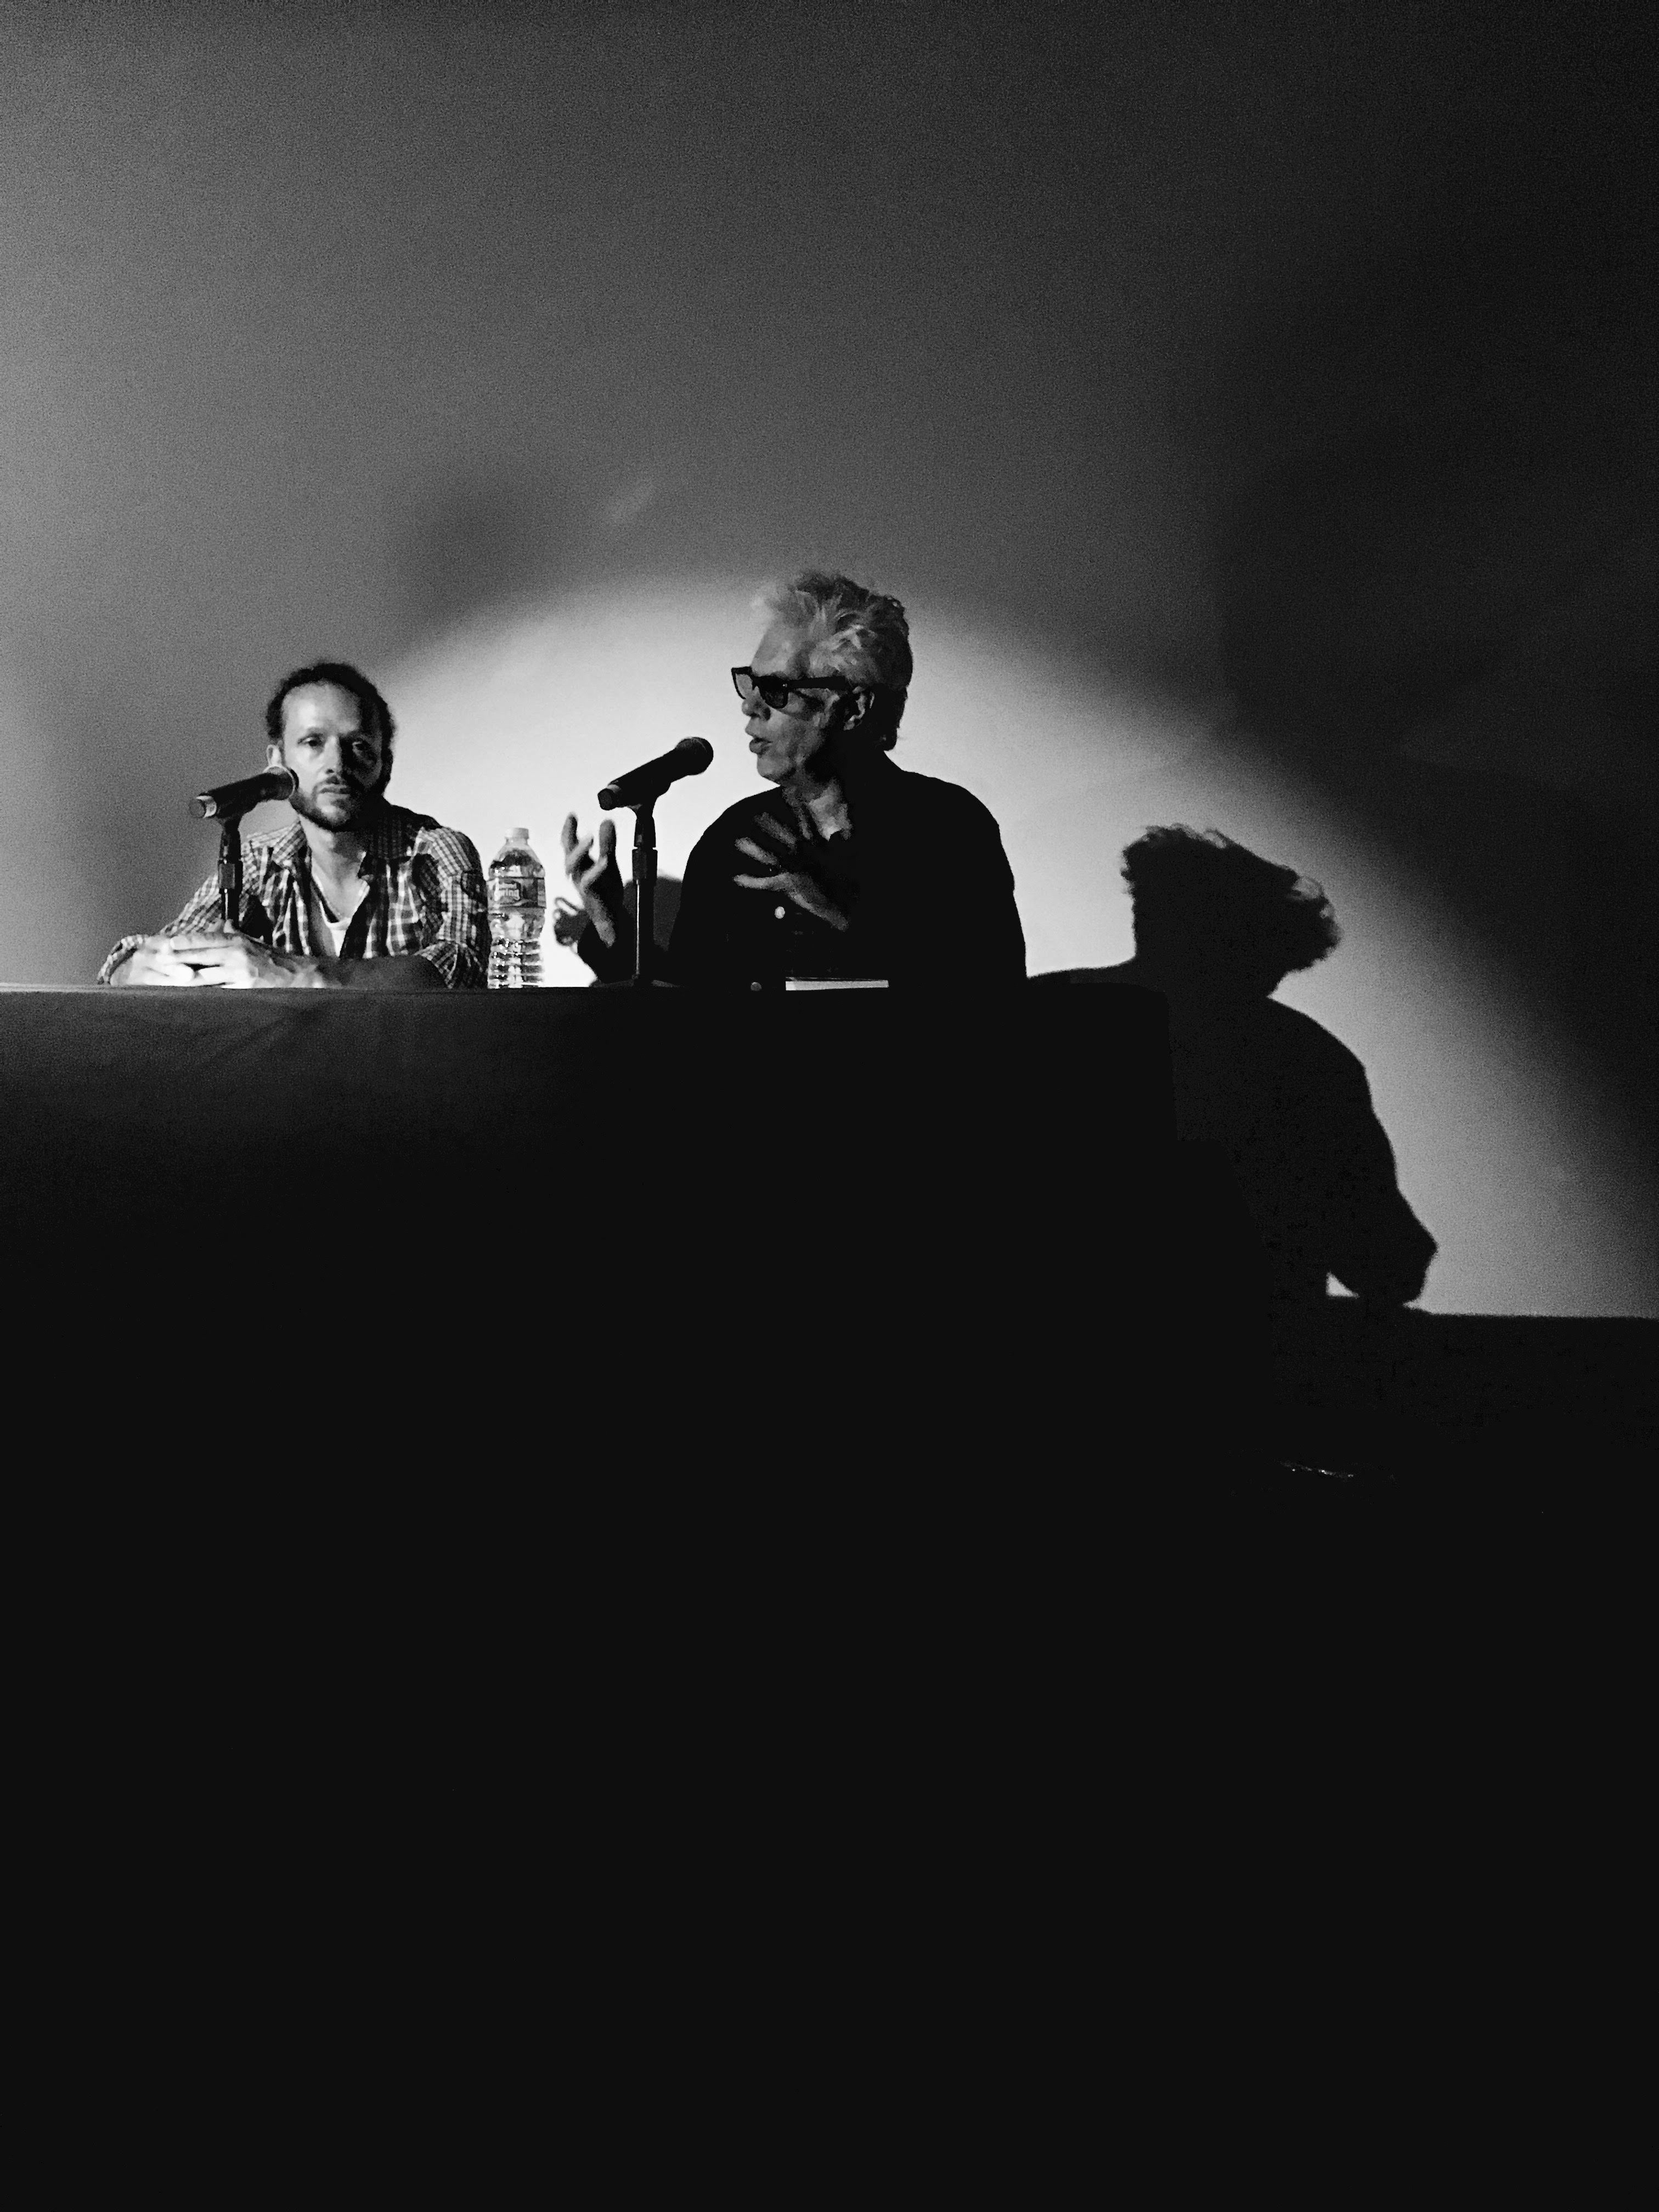 KNOW-WAVE - a discussion with Librizzi & Jarmusch